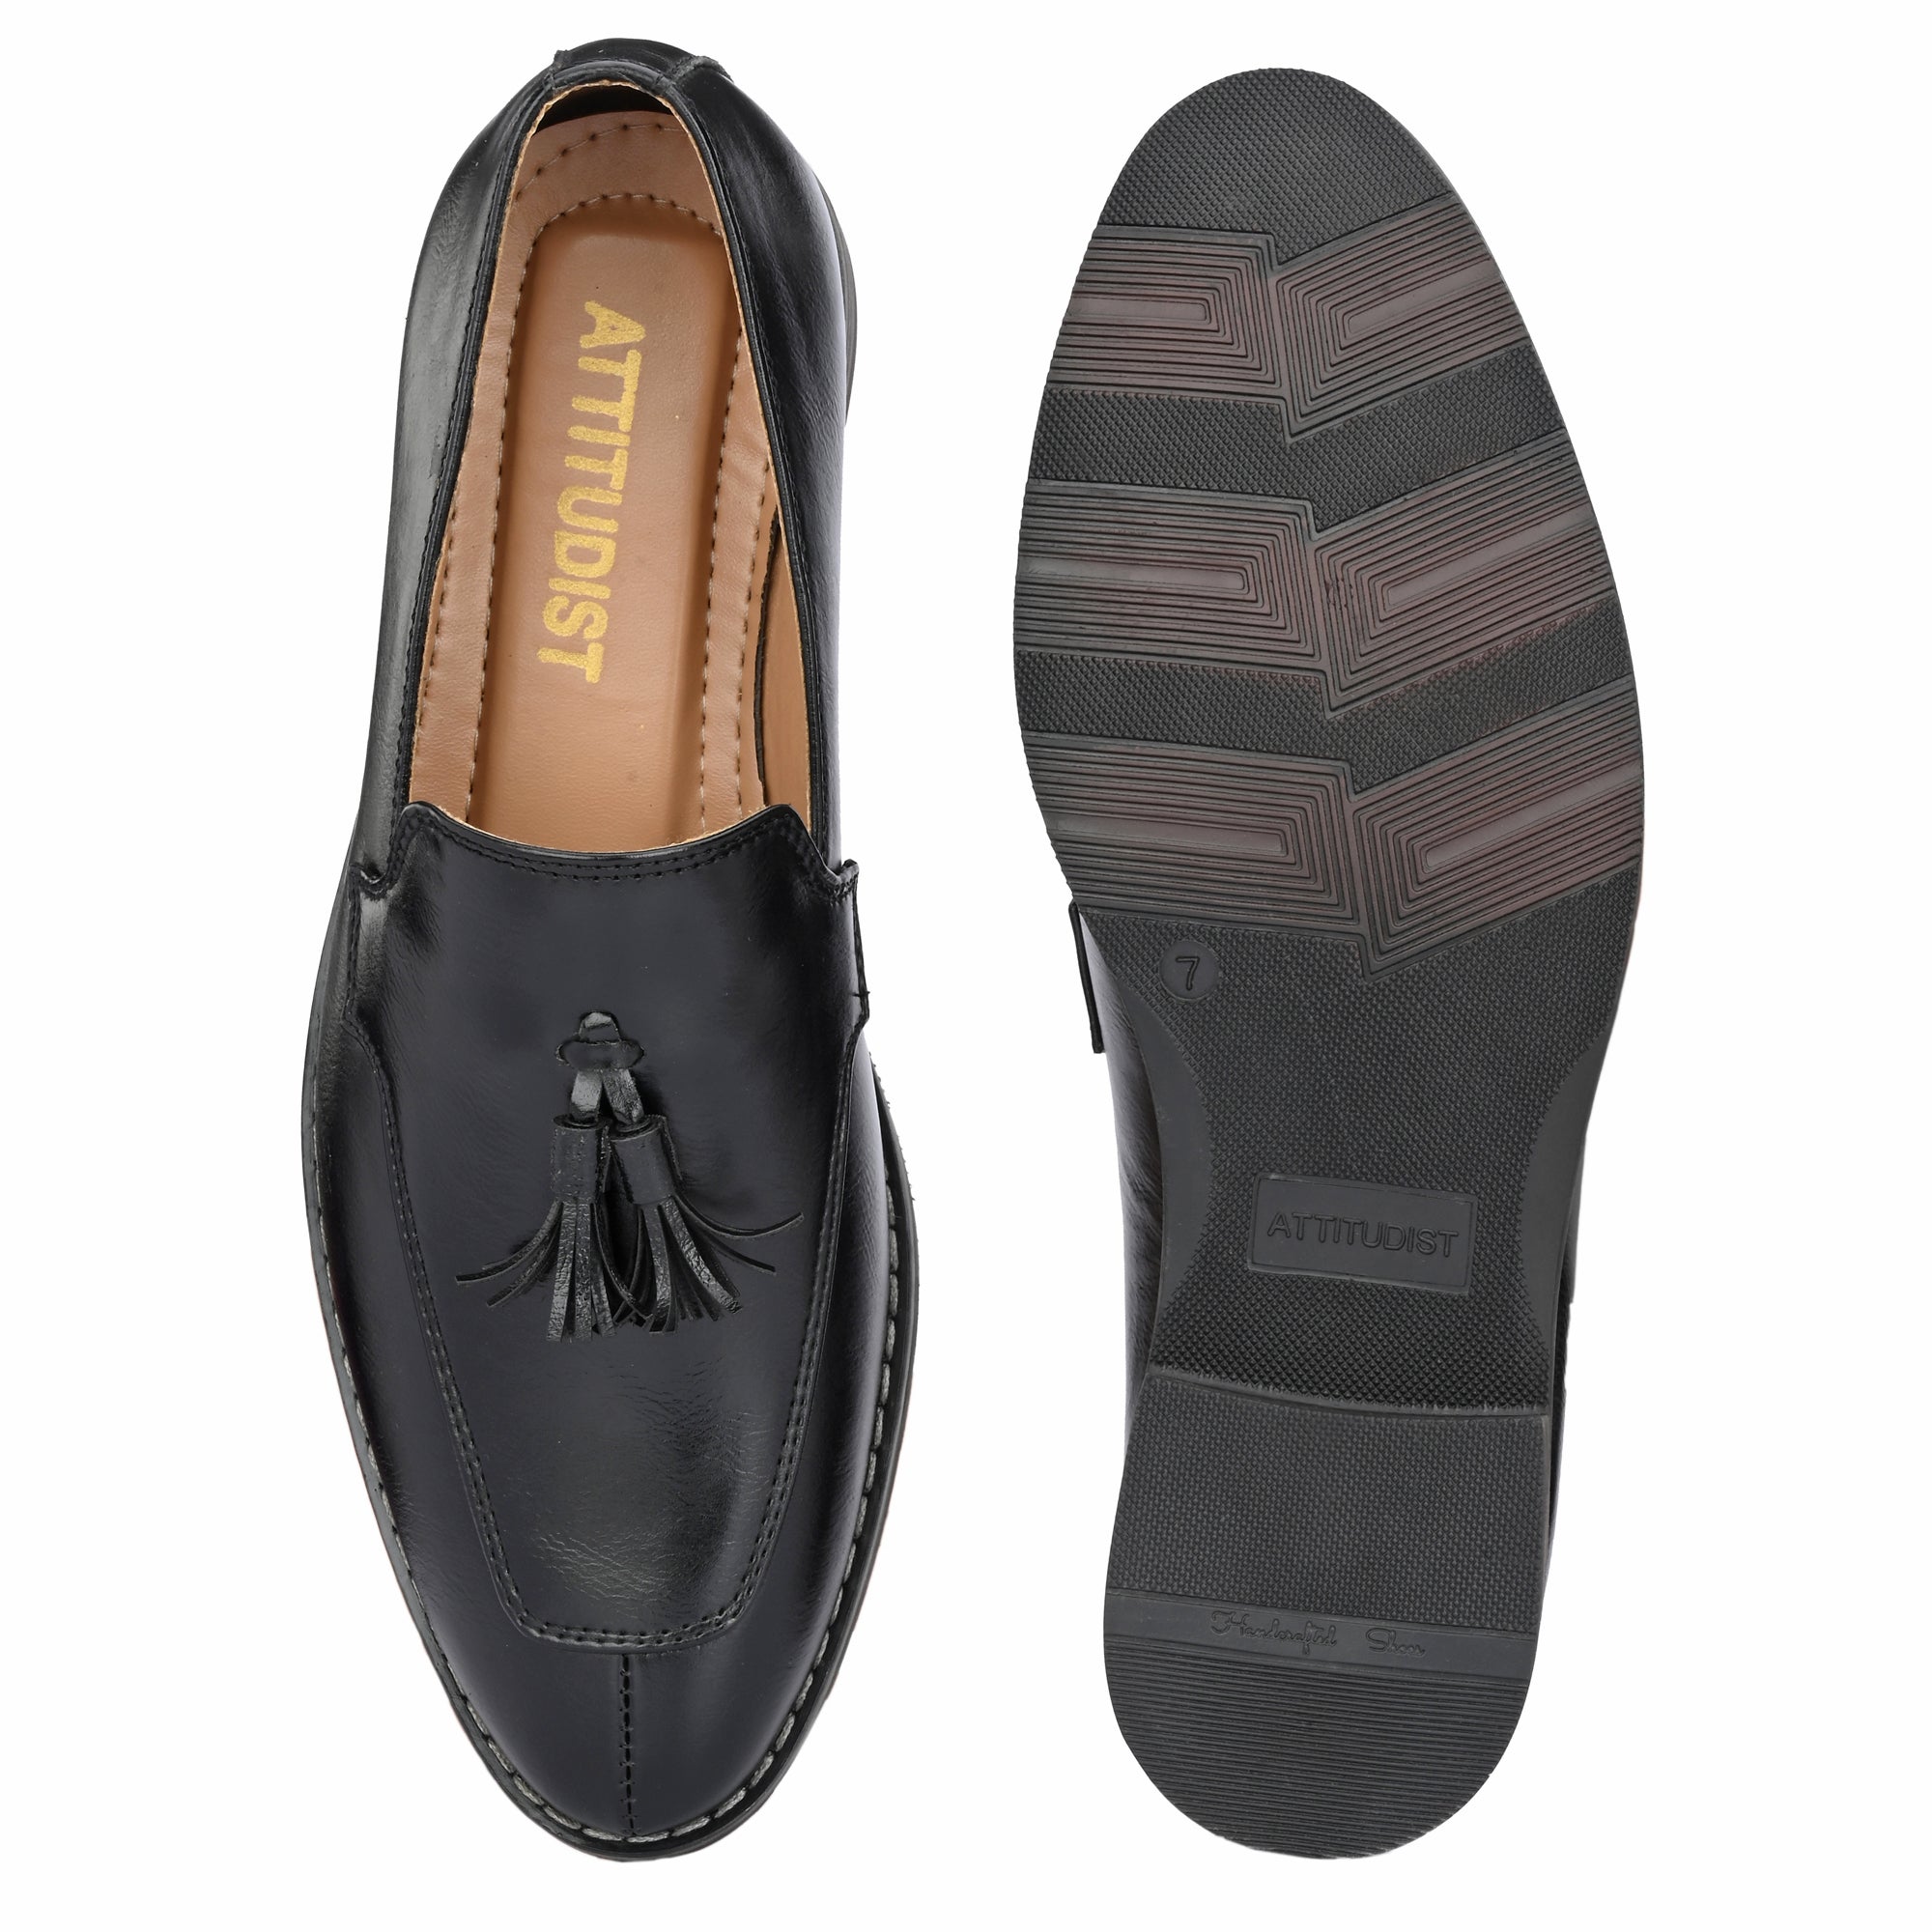 black-loafers-attitudist-shoes-for-men-with-tassel-sp13a